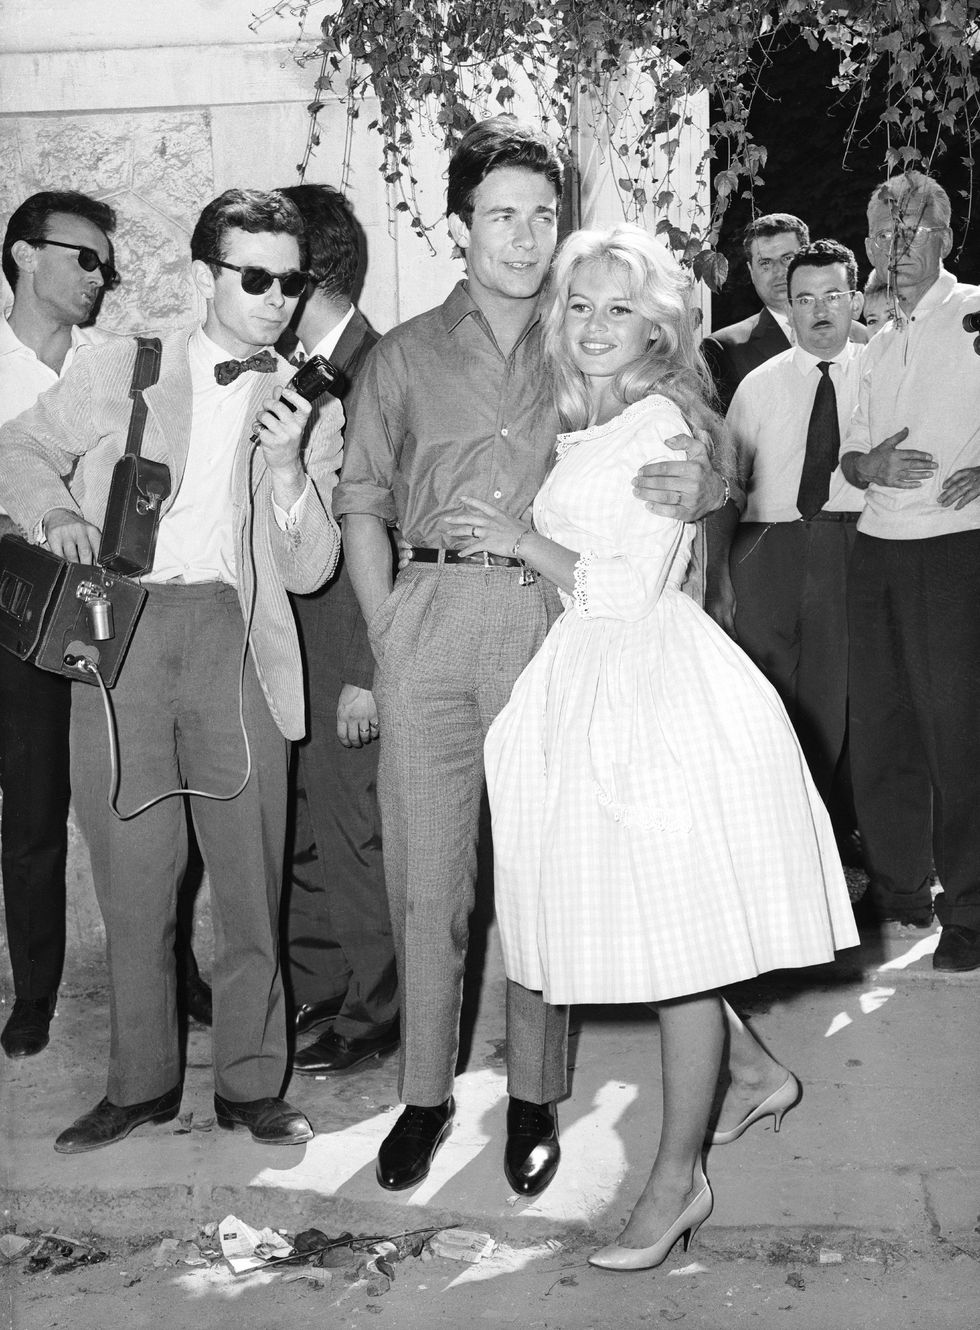 wedding of jacques charrier and brigitte bardot, in a vichy dress